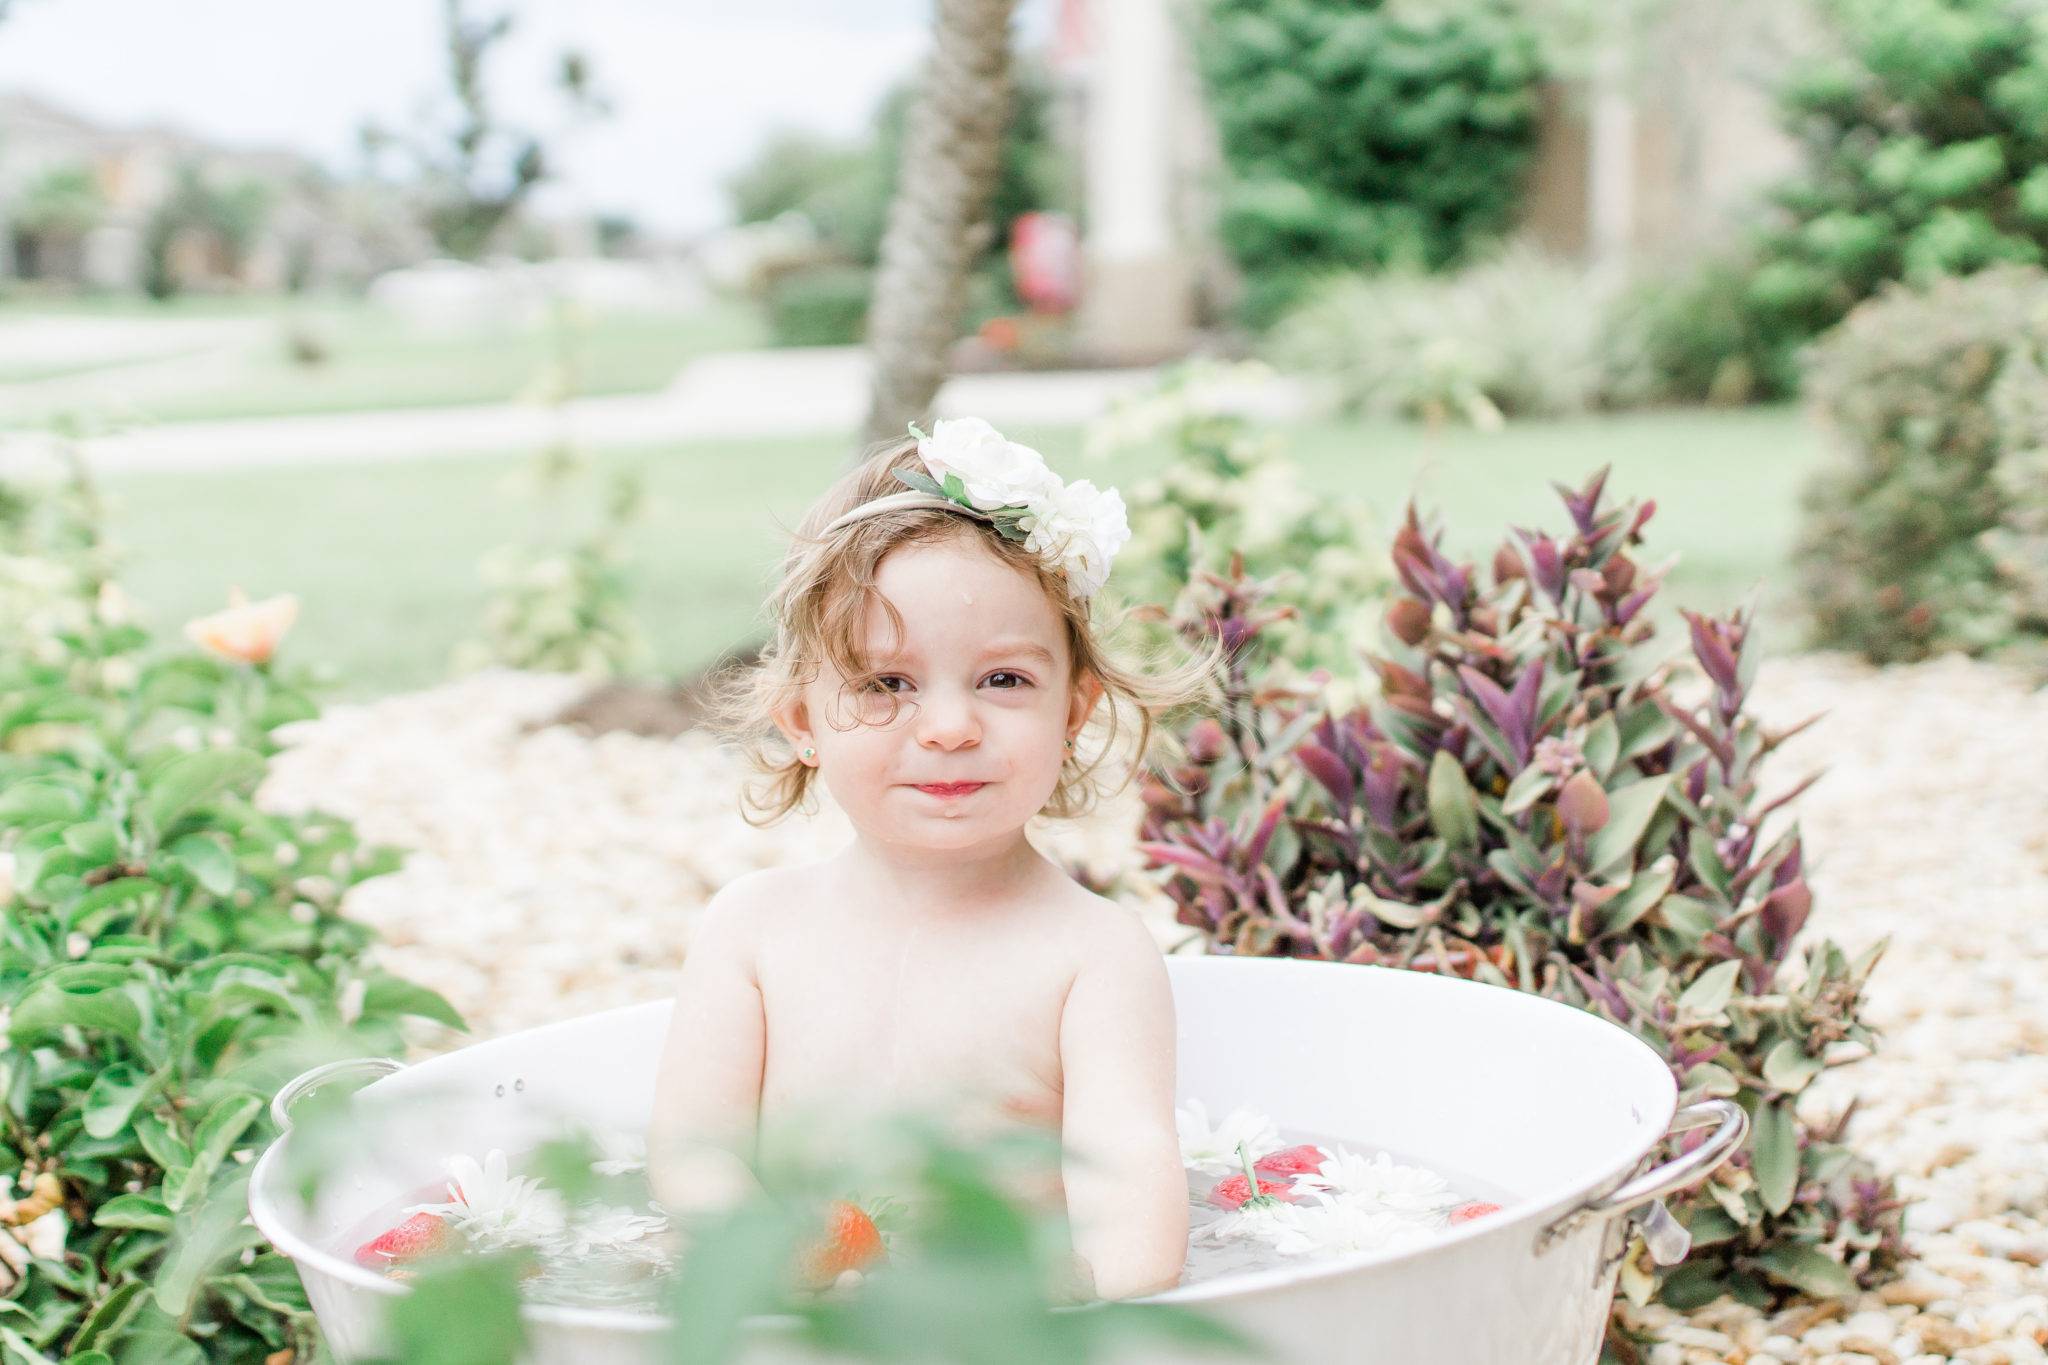 Outdoor citrus session, outdoor fruit bath, outdoor photoshoot, kids bath session photography, Tampa photographer, fresh berry photoshoot